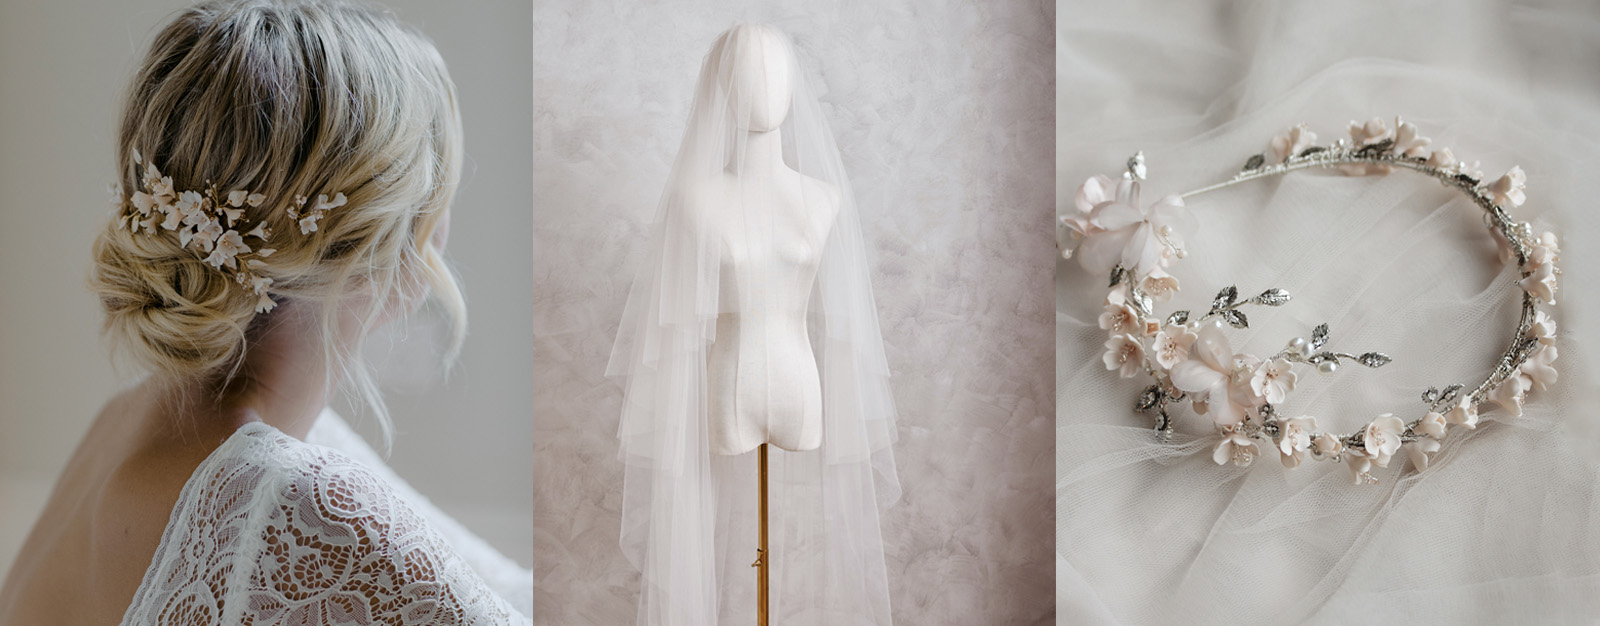 Simple wedding accessories for the modern bride